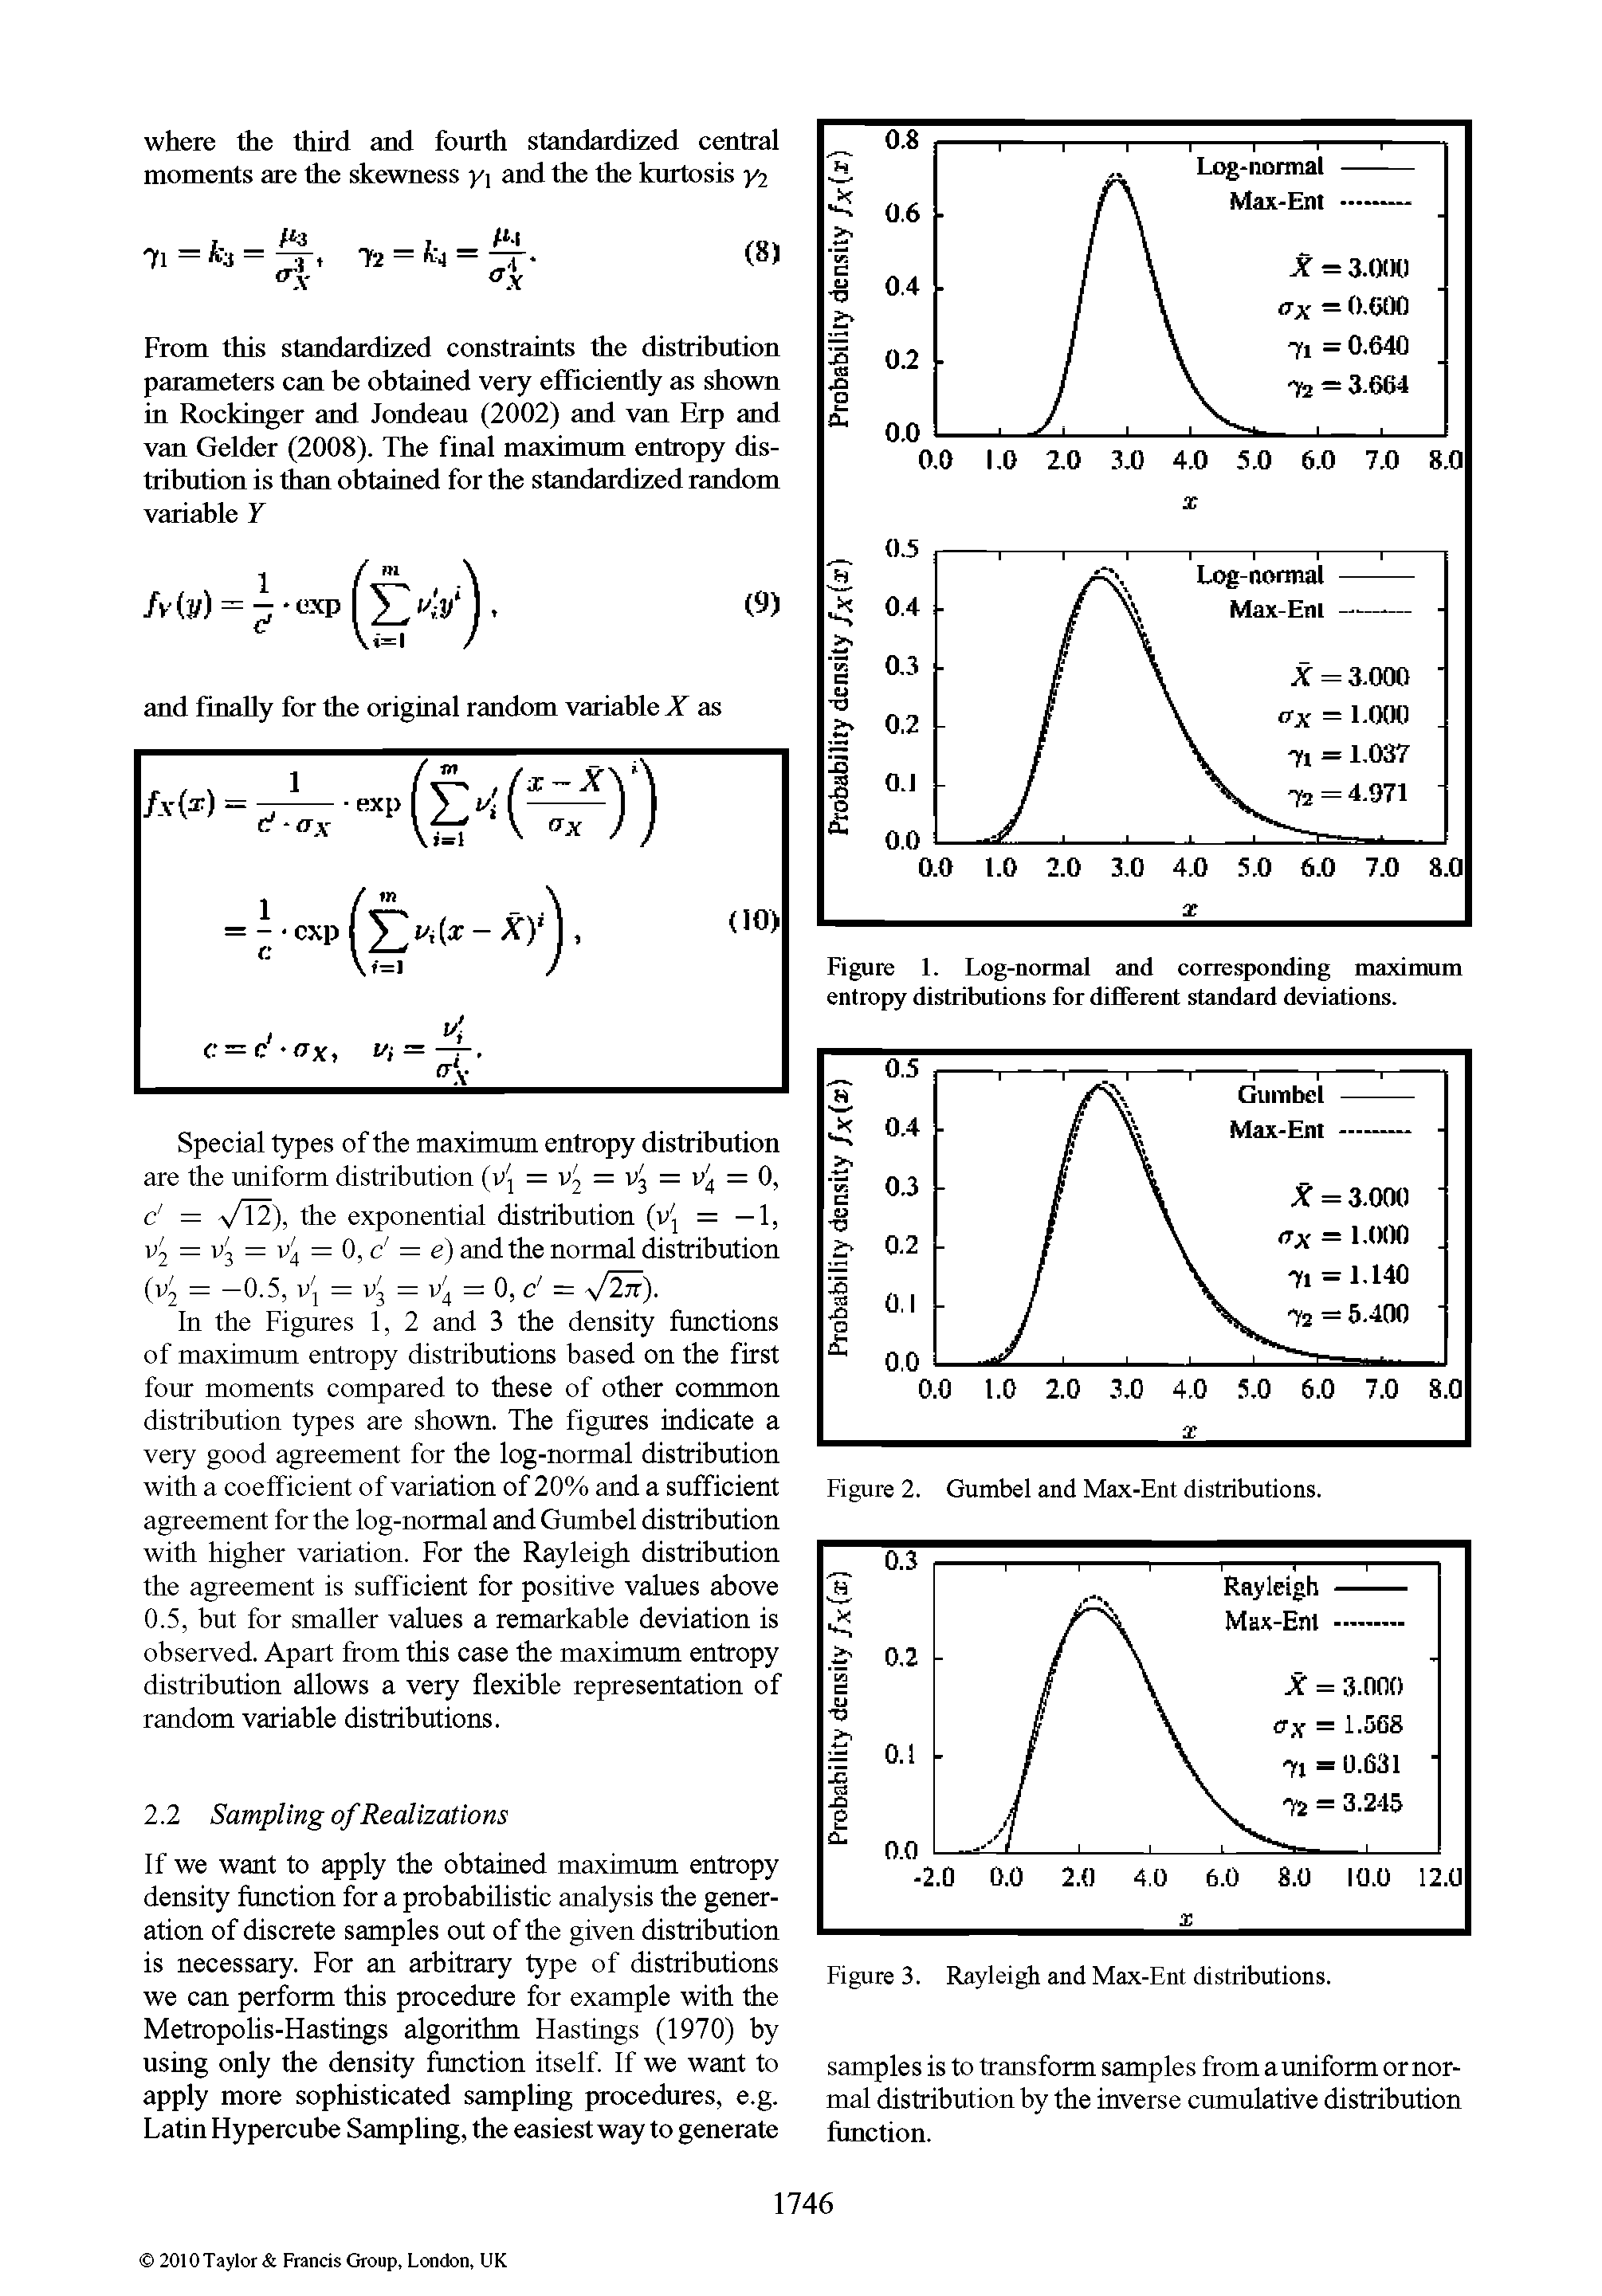 Figure 1. Log-normal and corresponding maximum entropy distributions for different standard deviations.